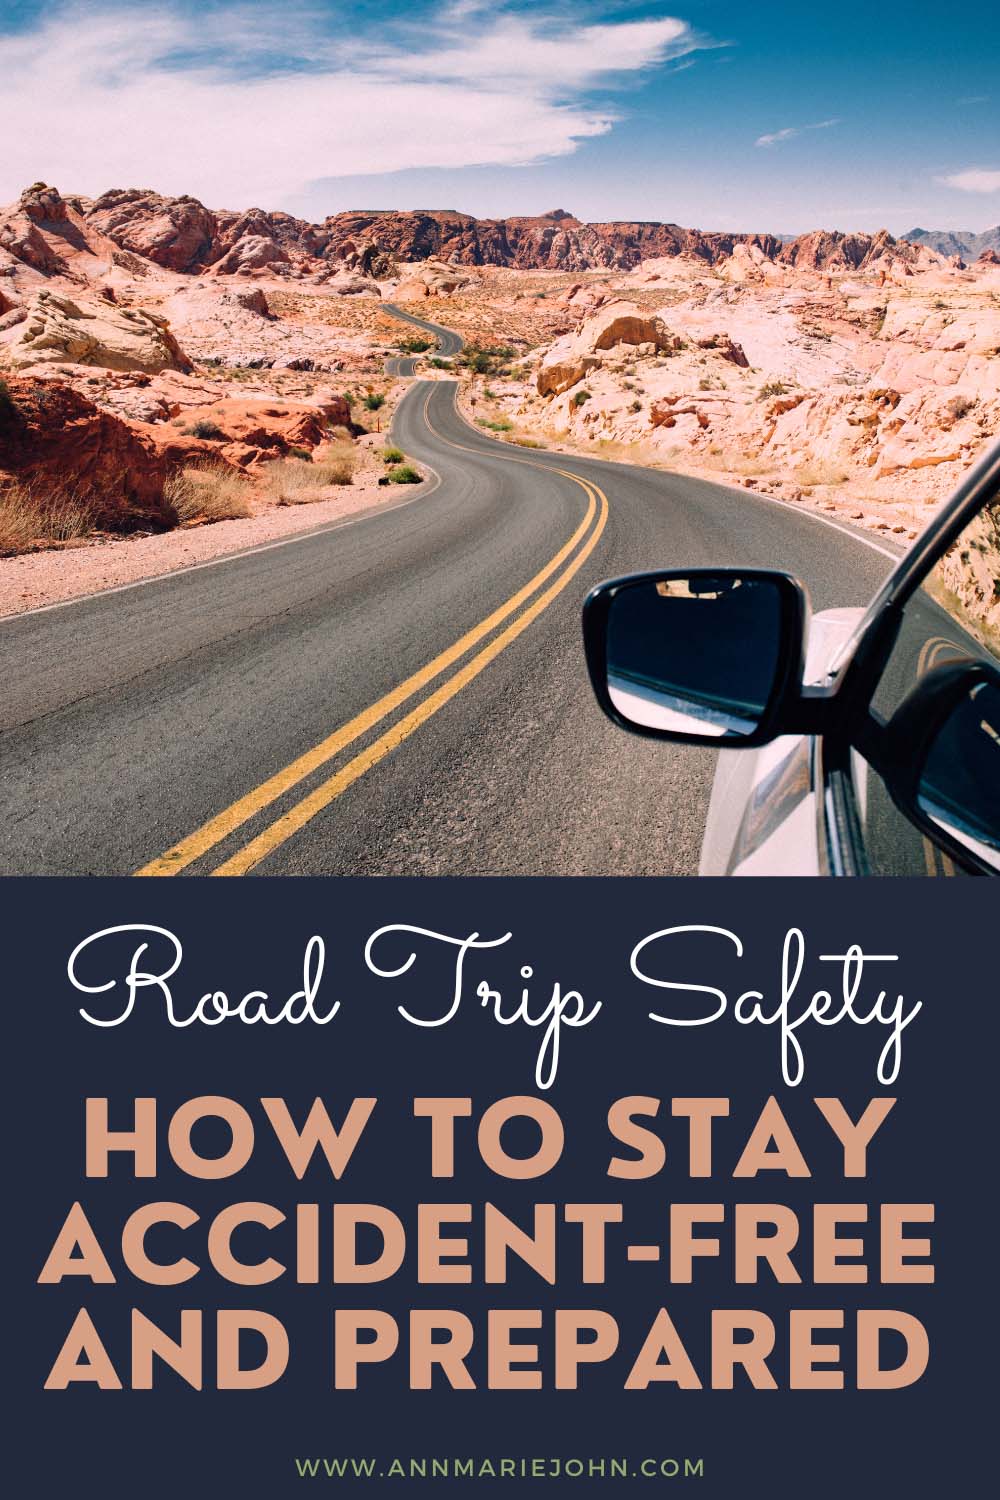 Road Trip Safety: How to Stay Accident-Free and Prepared